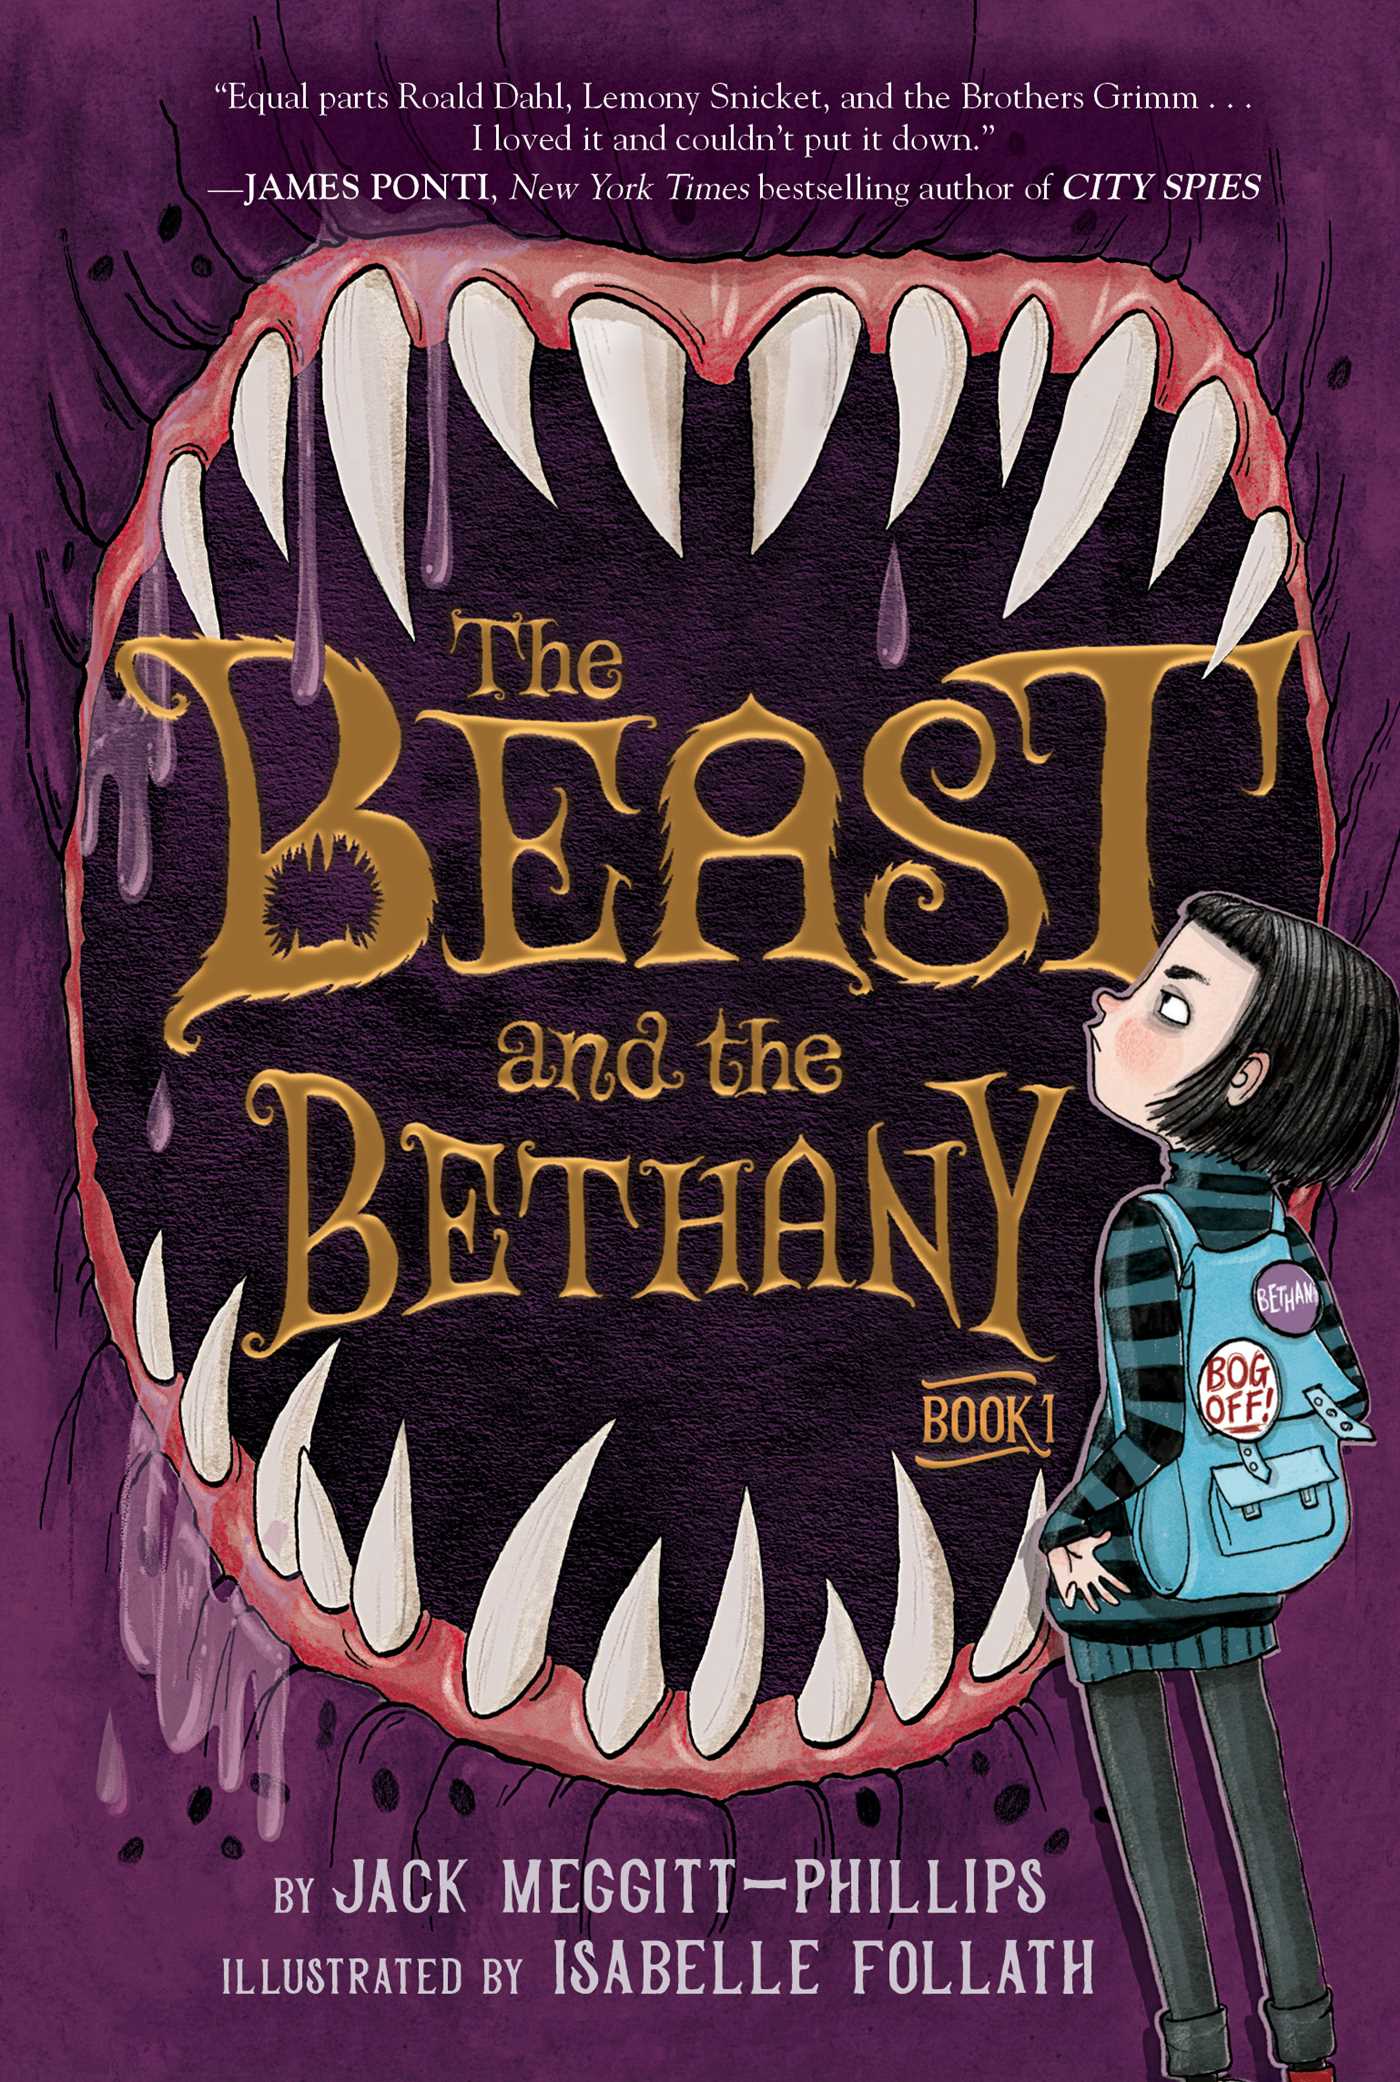 The Cover illustration for The Beast and the Bethany - a white child staring into the mouth of a monster with sharp teeth.